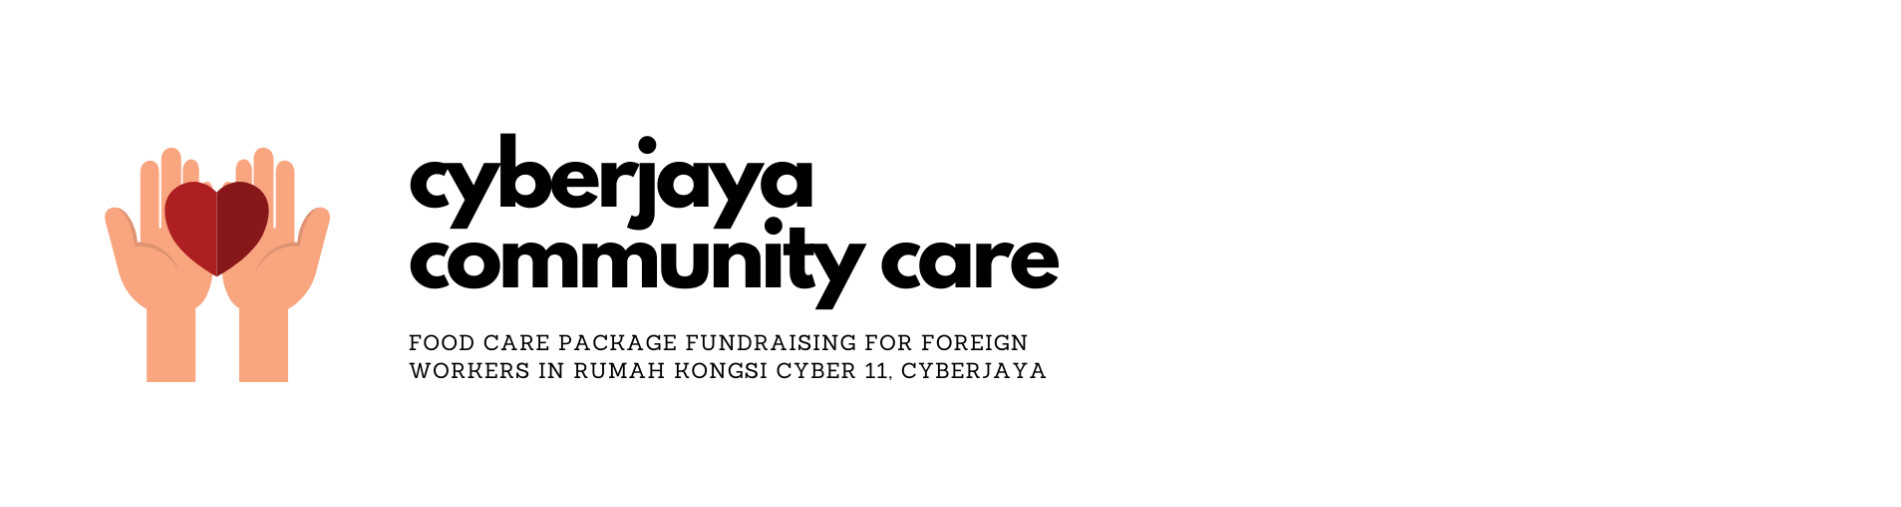 Food Aid Fundraising for Foreign Workers in Cyber 11, Cyberjaya